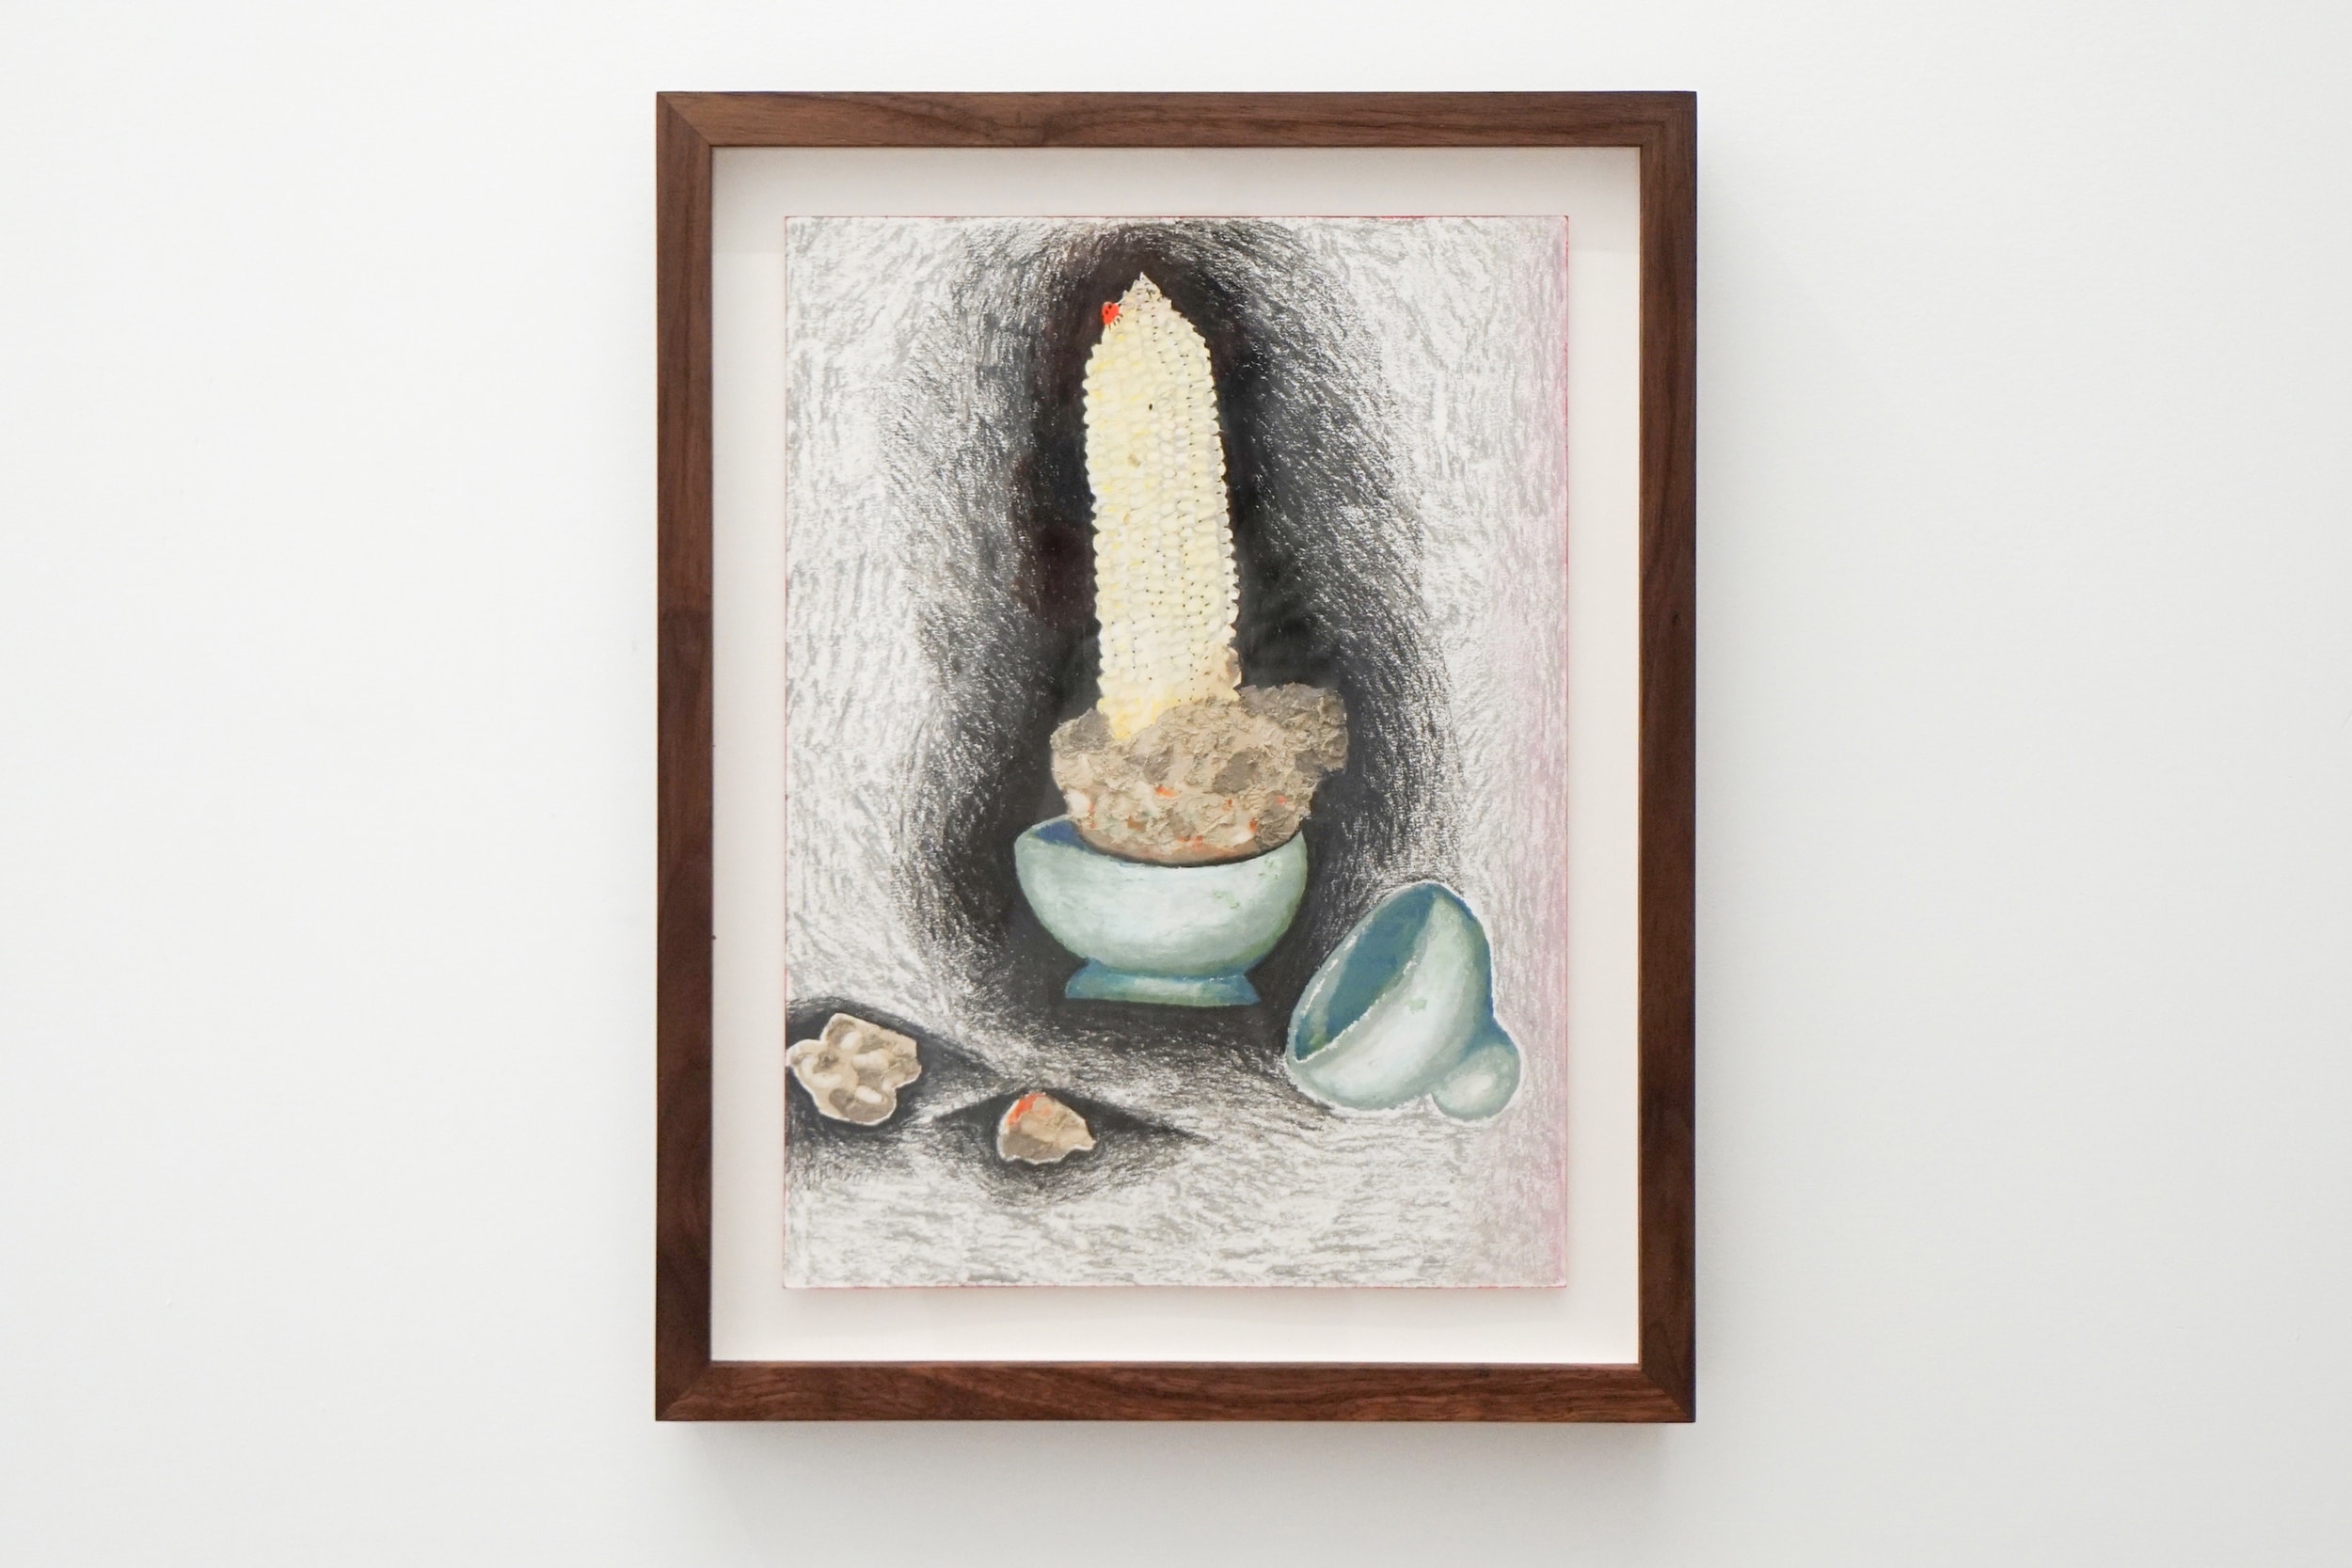  Morgan Ritter  Nesting Doll of White Corn and Putty Balls , 2015 Pastel, oil stick on paper, framed in walnut 18.5 x 14.5 inches 